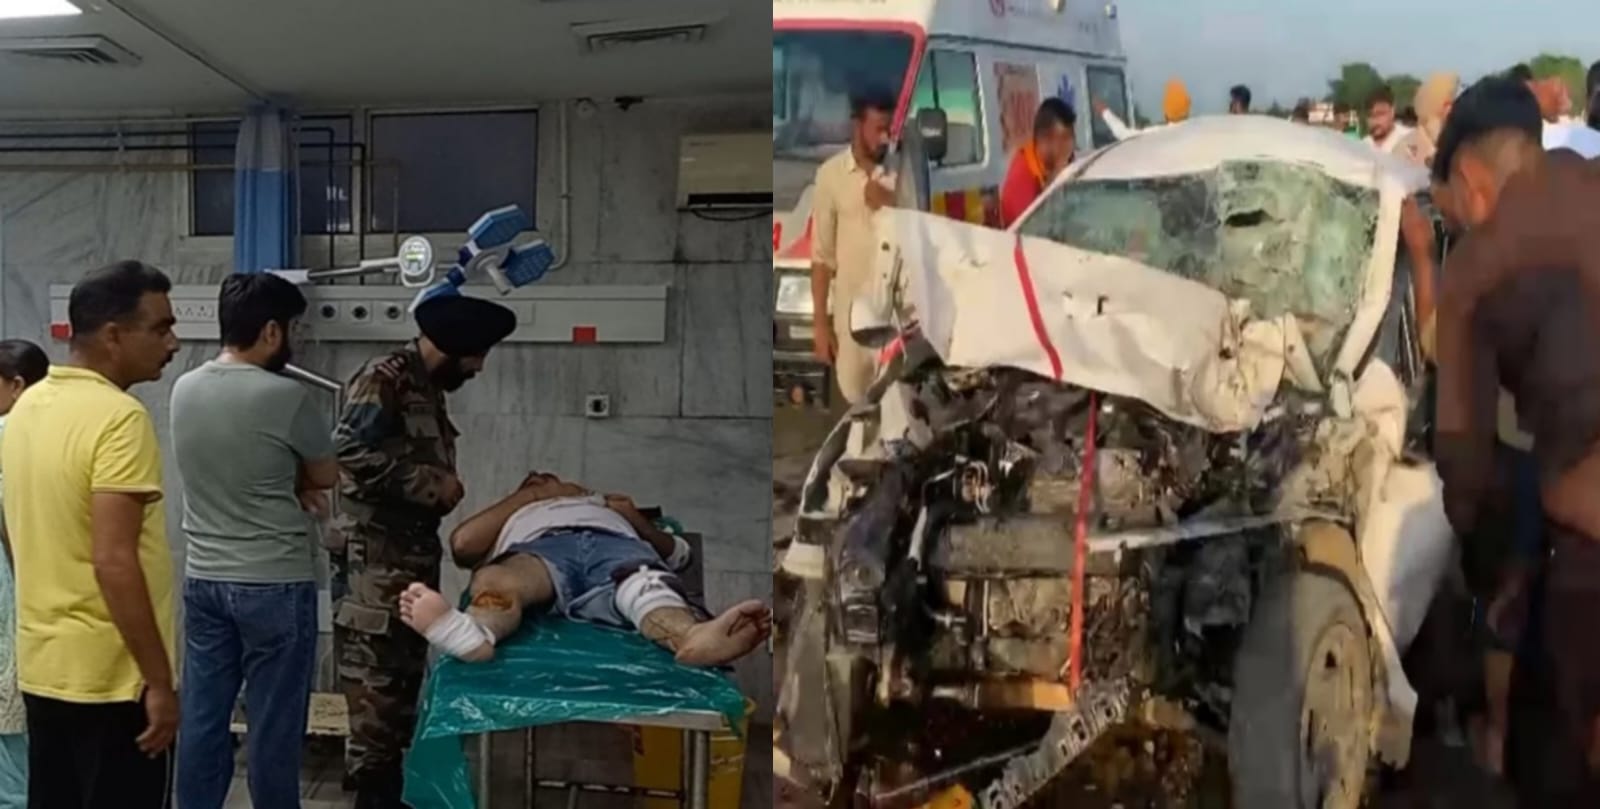 Female army officer Chitra Pandey, who was going to meet her husband with her seven-year-old son, died in a road accident.